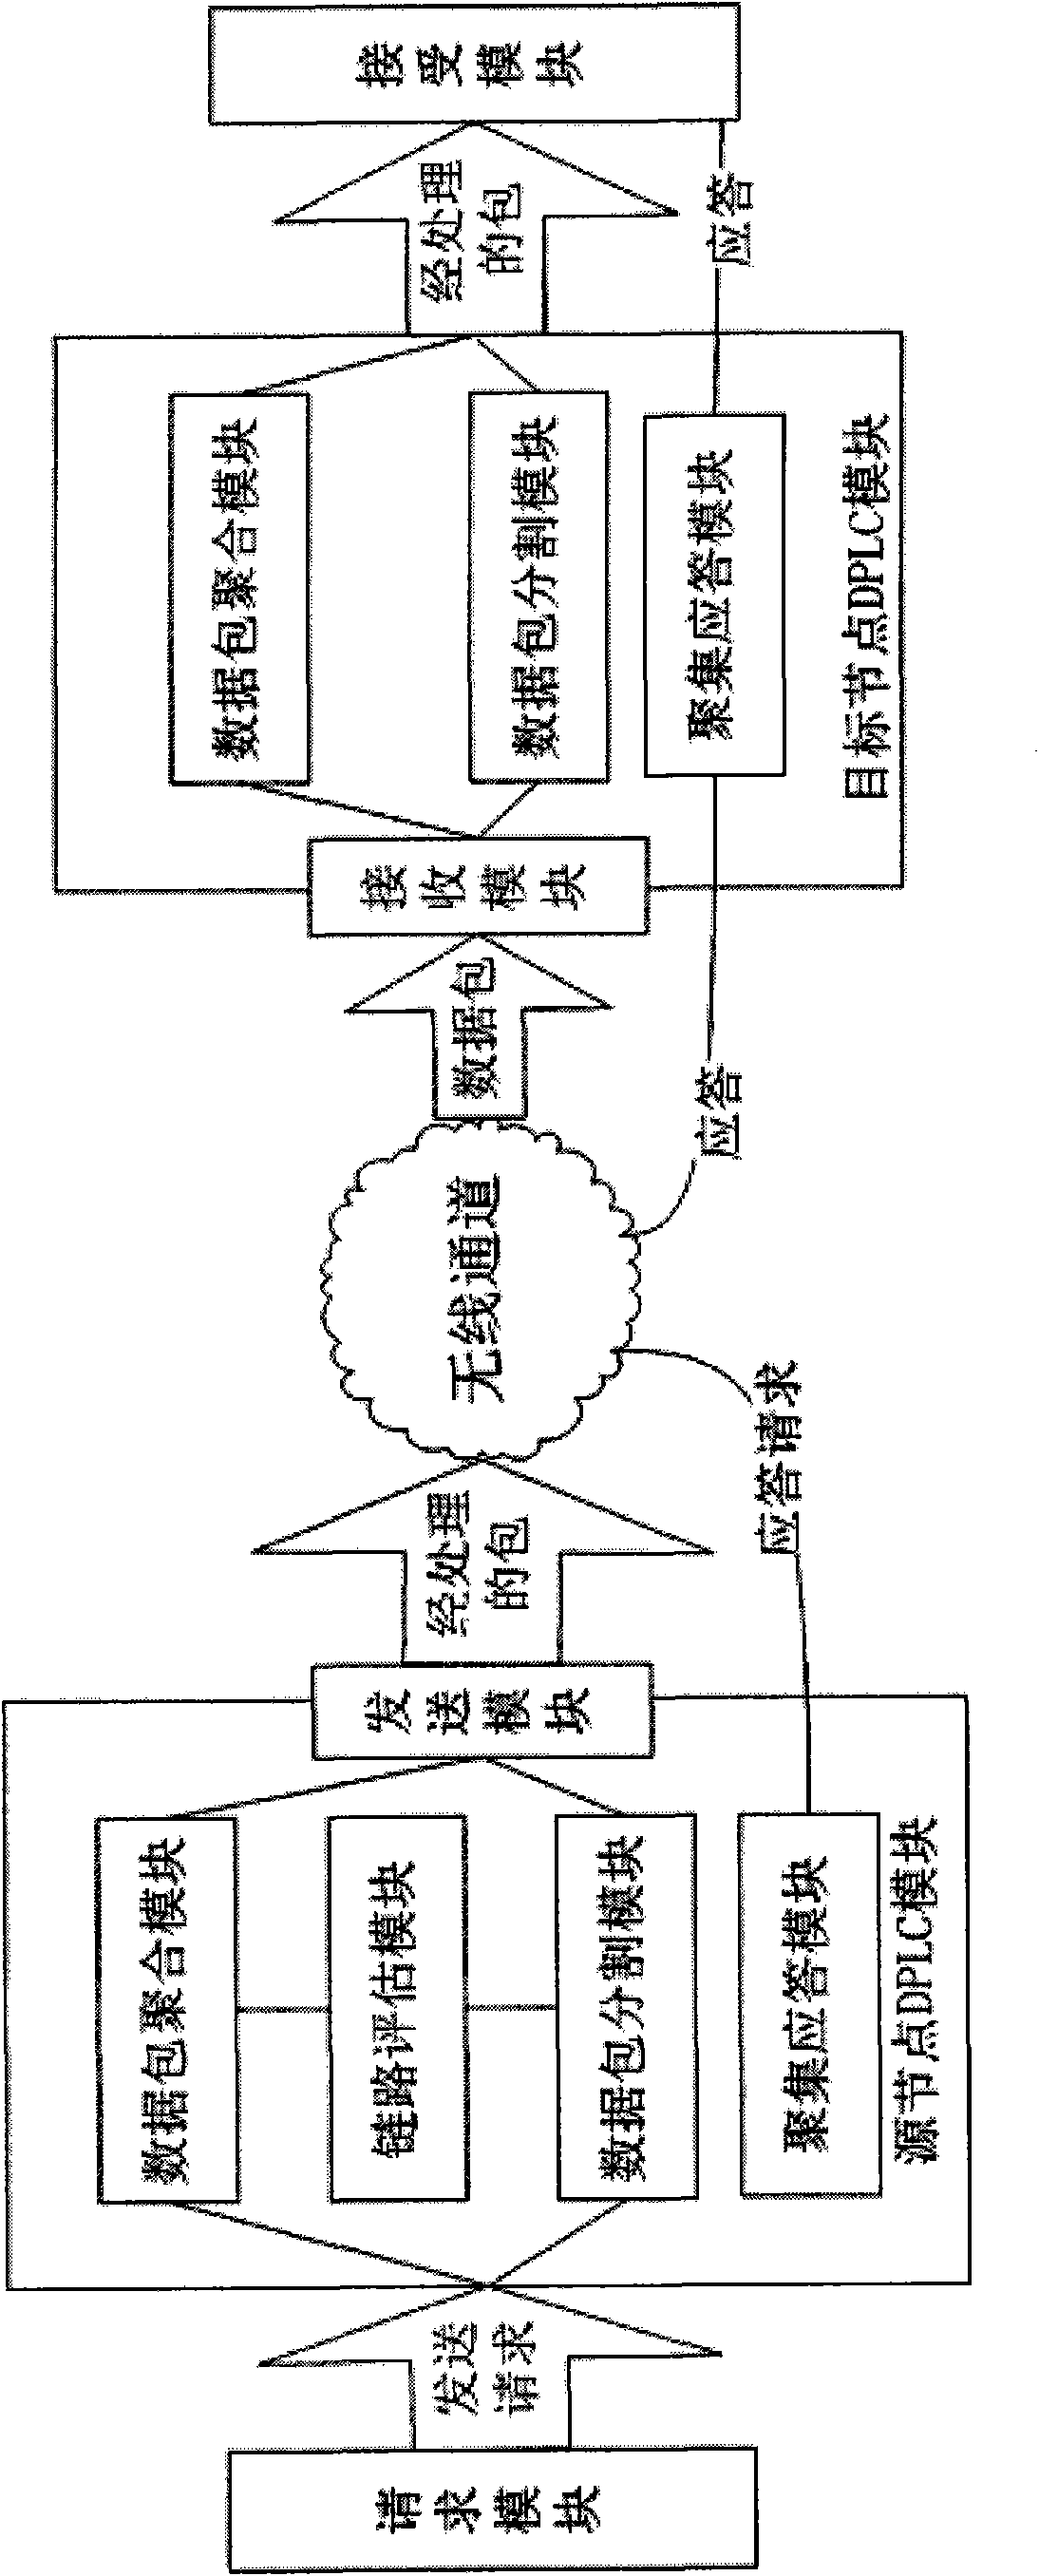 Method for dynamic control of data packet length in wireless sensor network